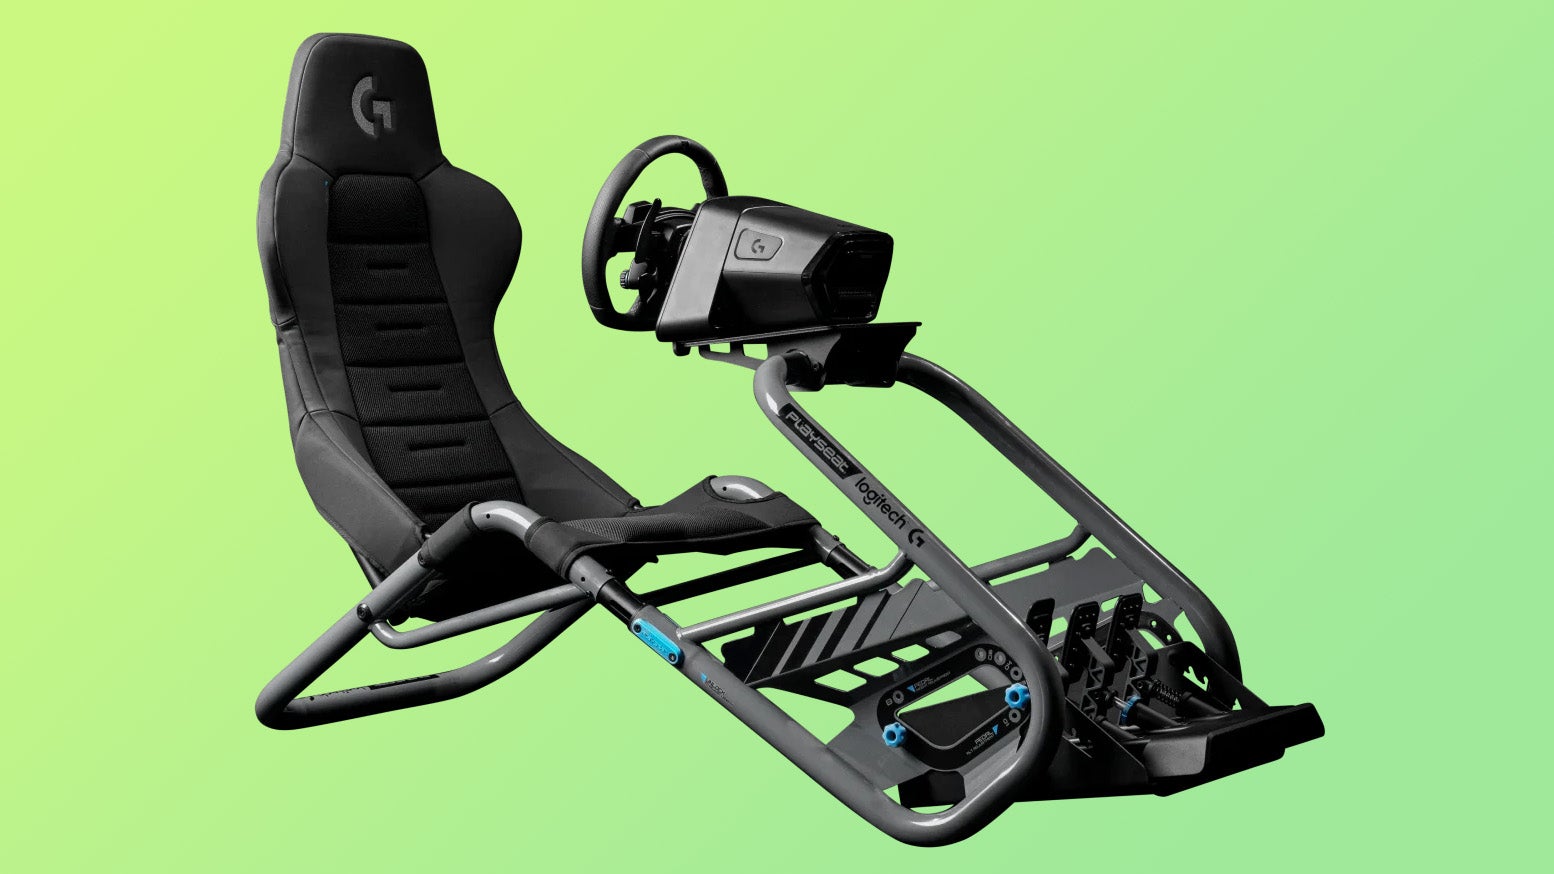 Logitech Pro Racing Wheel, Pro Racing Pedals and Playseat Trophy